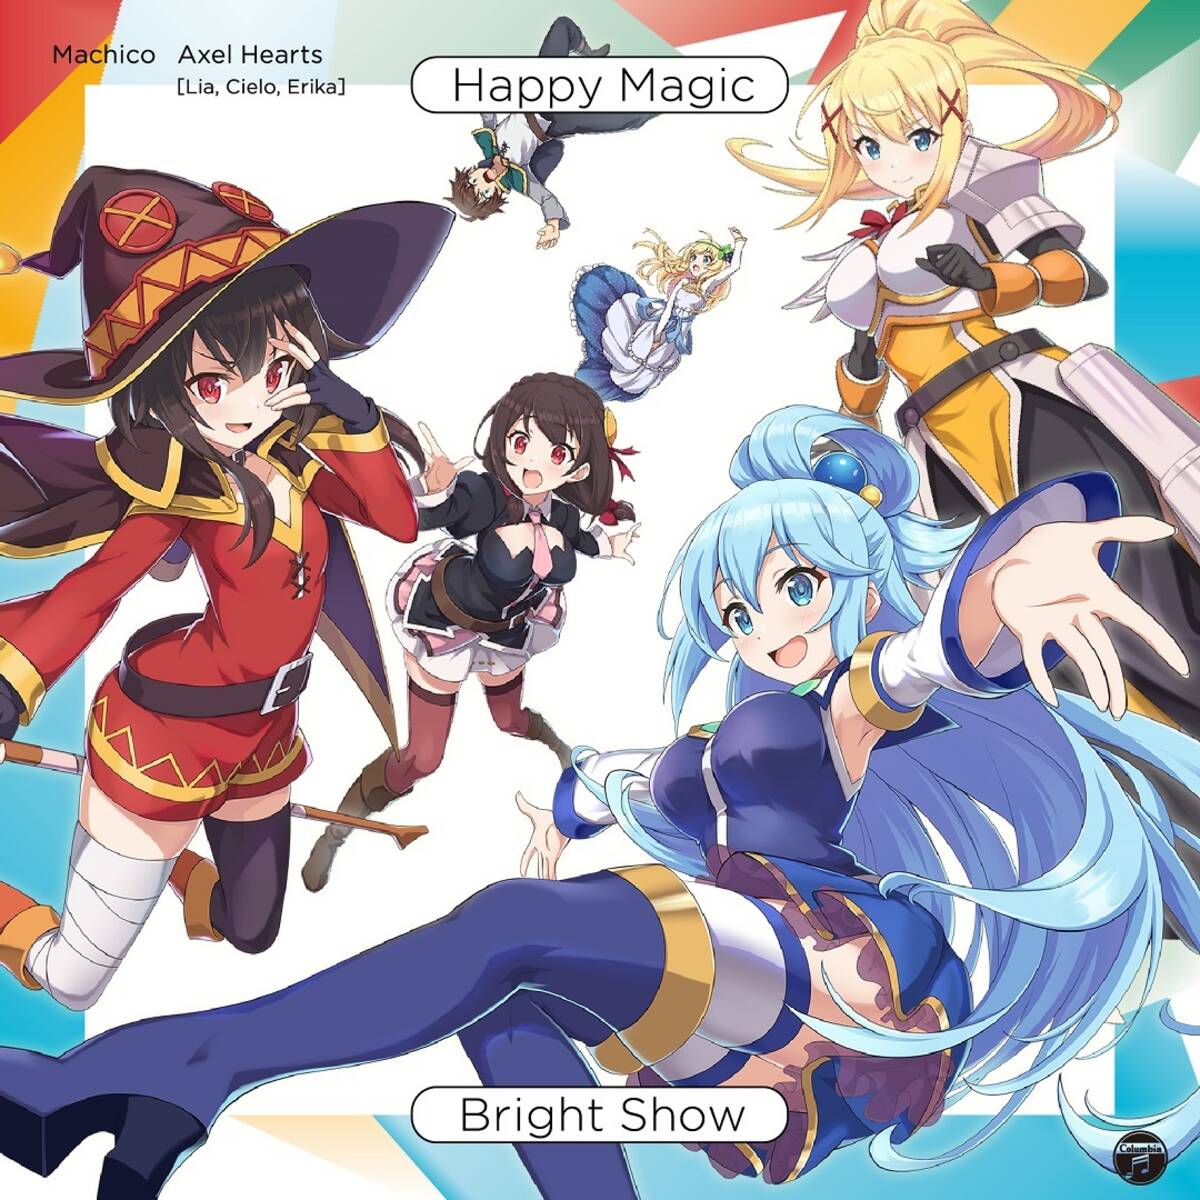 Cover art for『Machico - Happy Magic』from the release『Happy Magic/Bright Show』